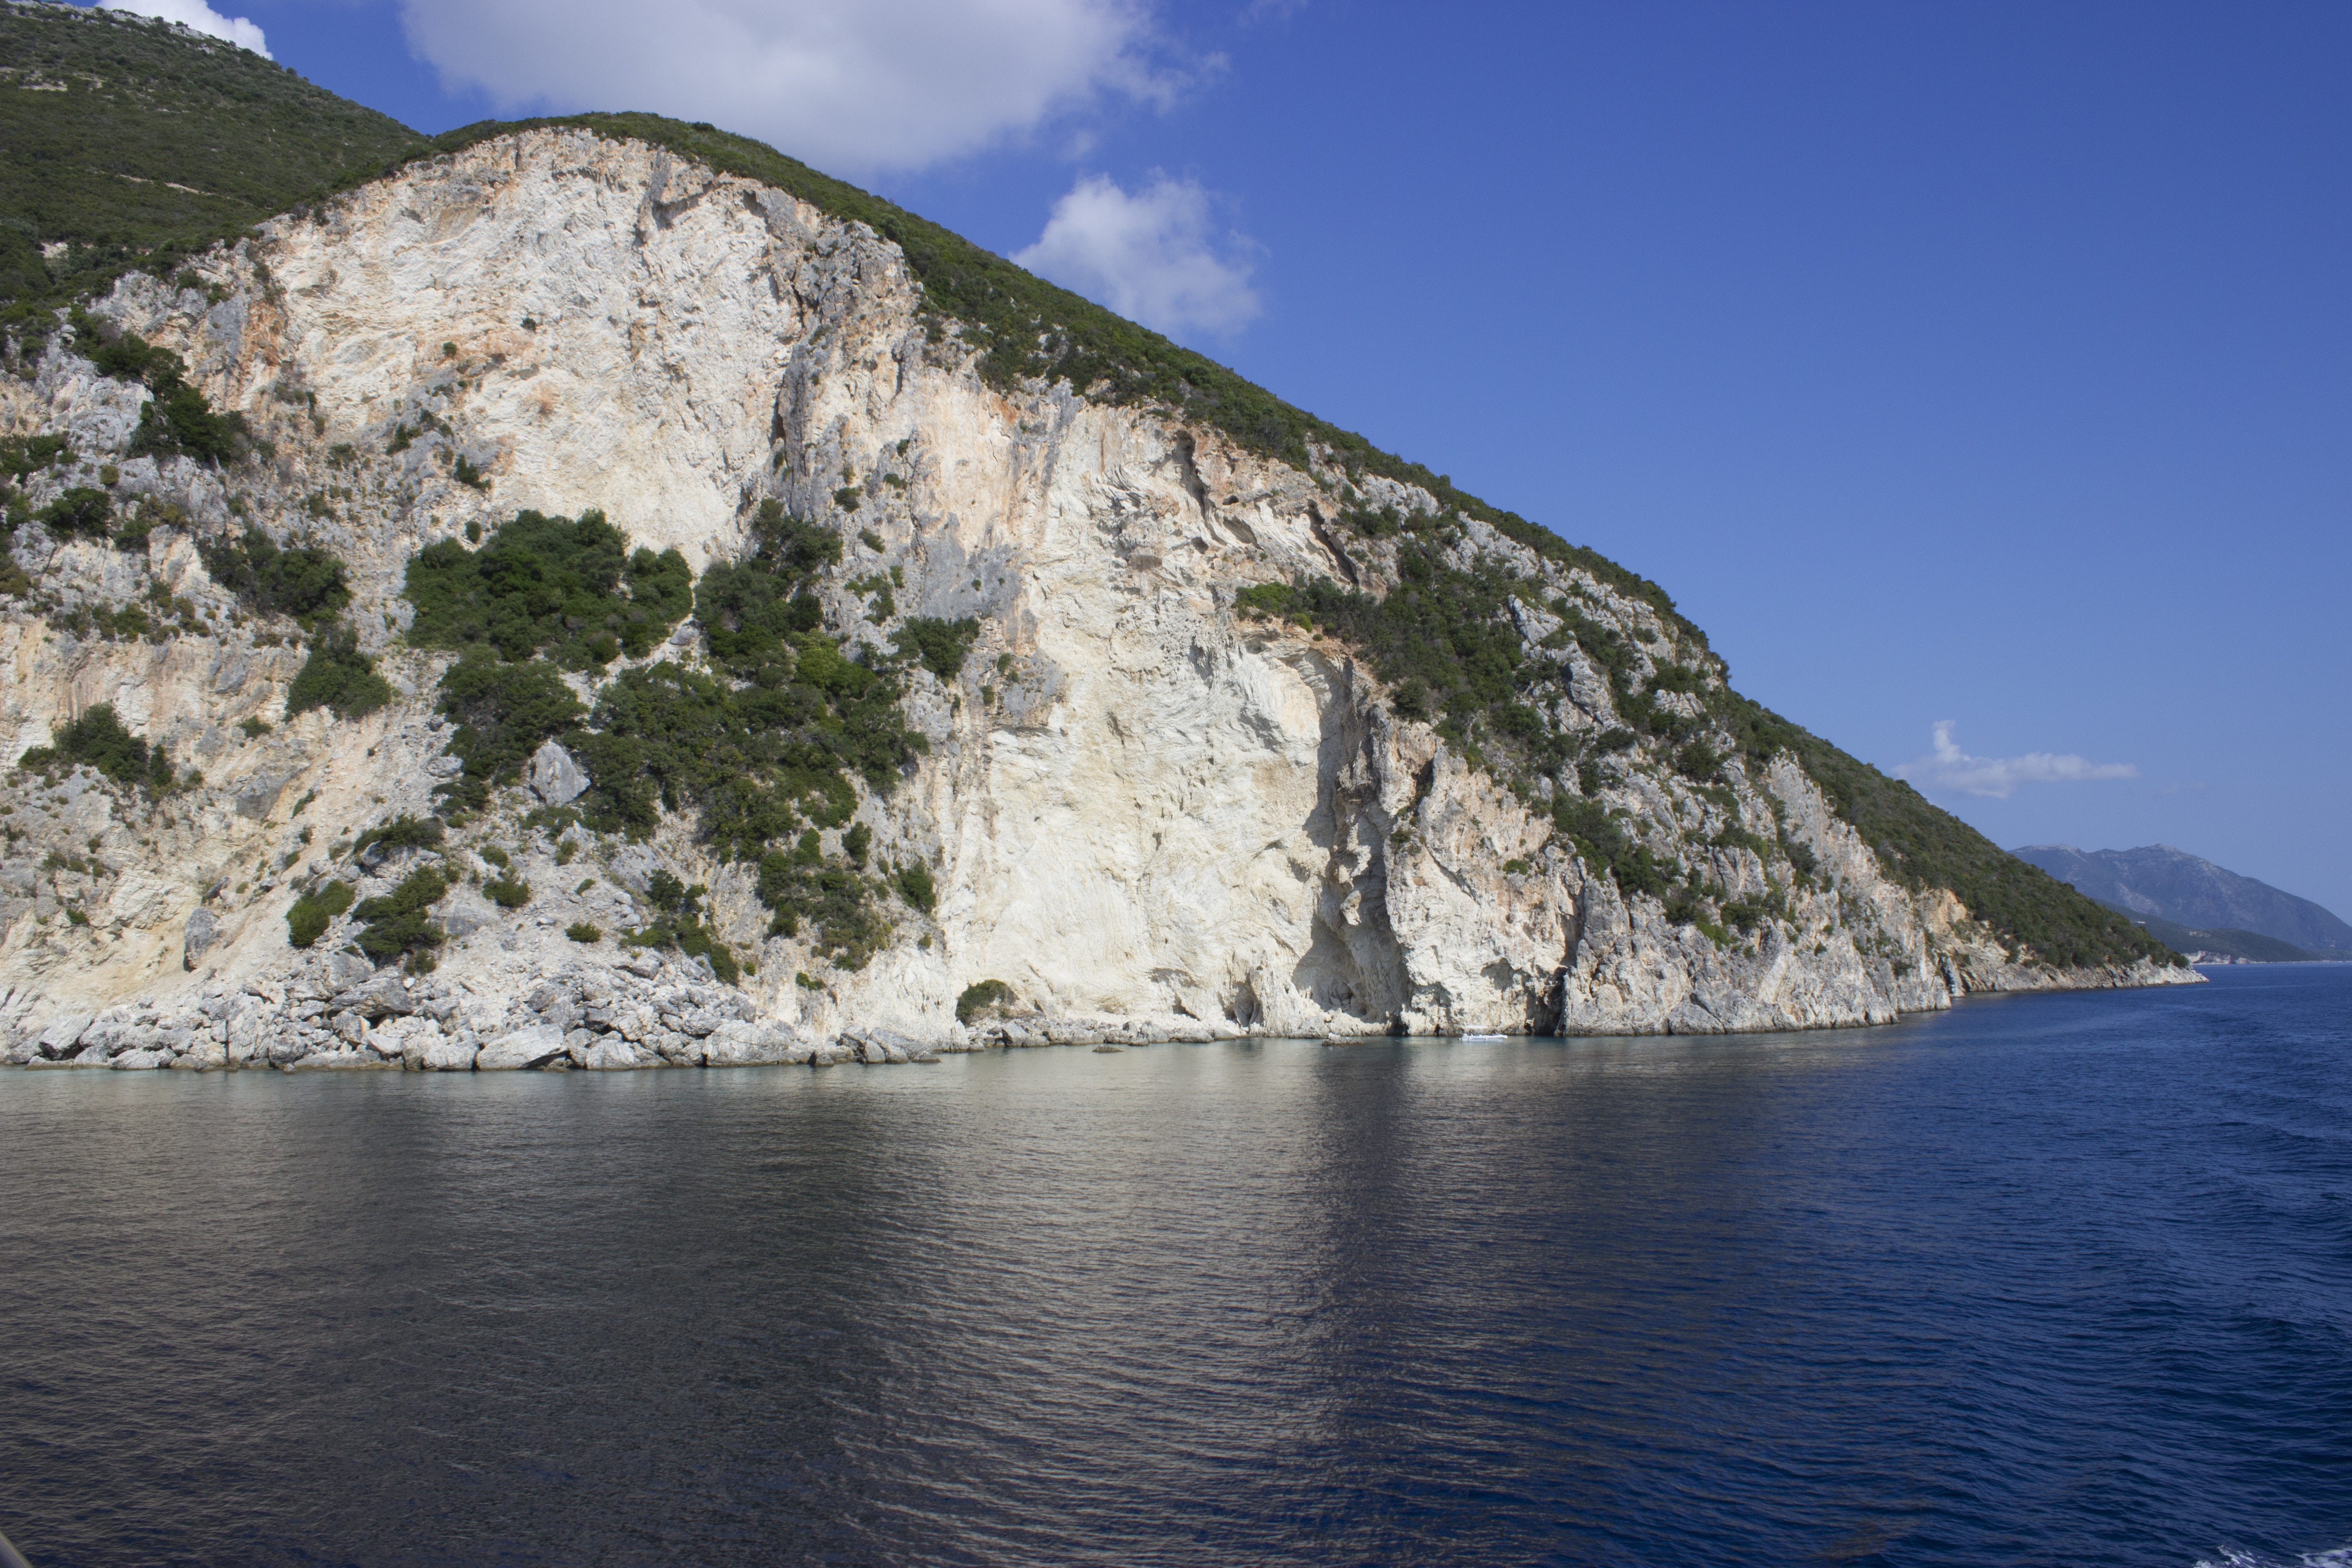 grey and brown rugged and dense hill beside blue calm body of water during daytime